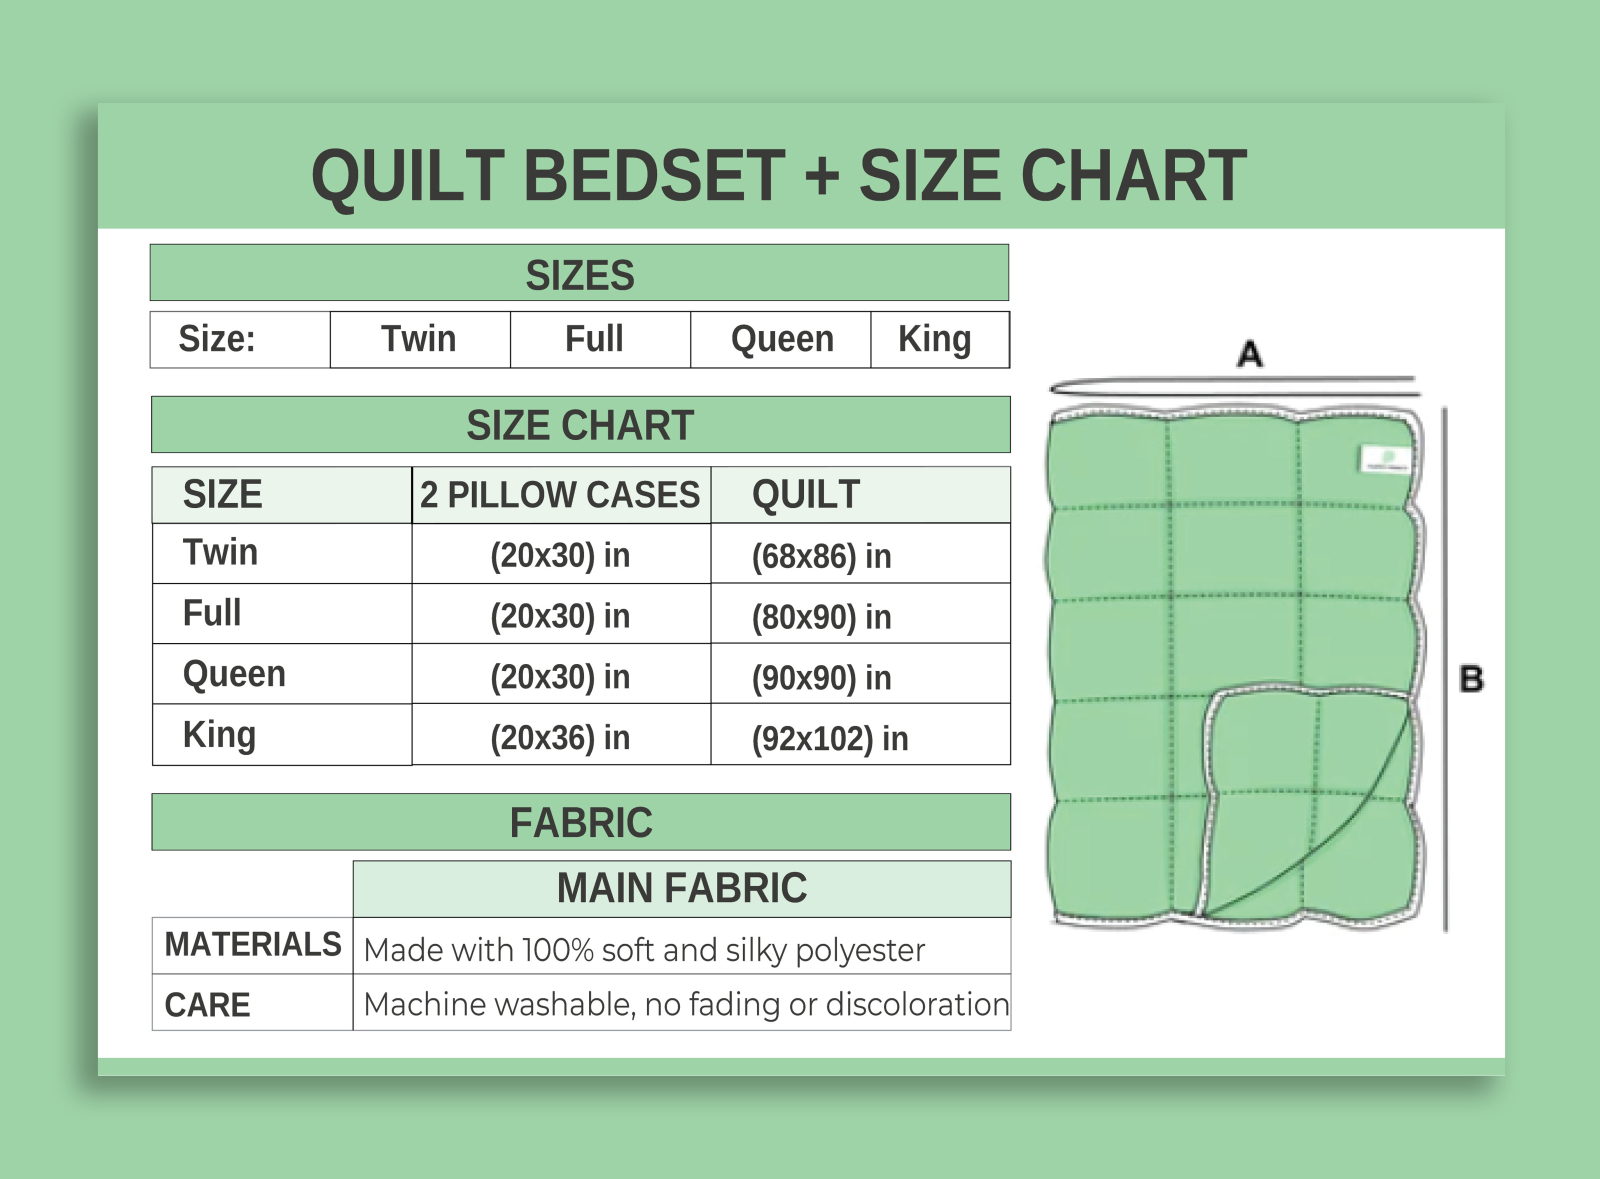 Professional Product size chart design by Shaon Rahman on Dribbble